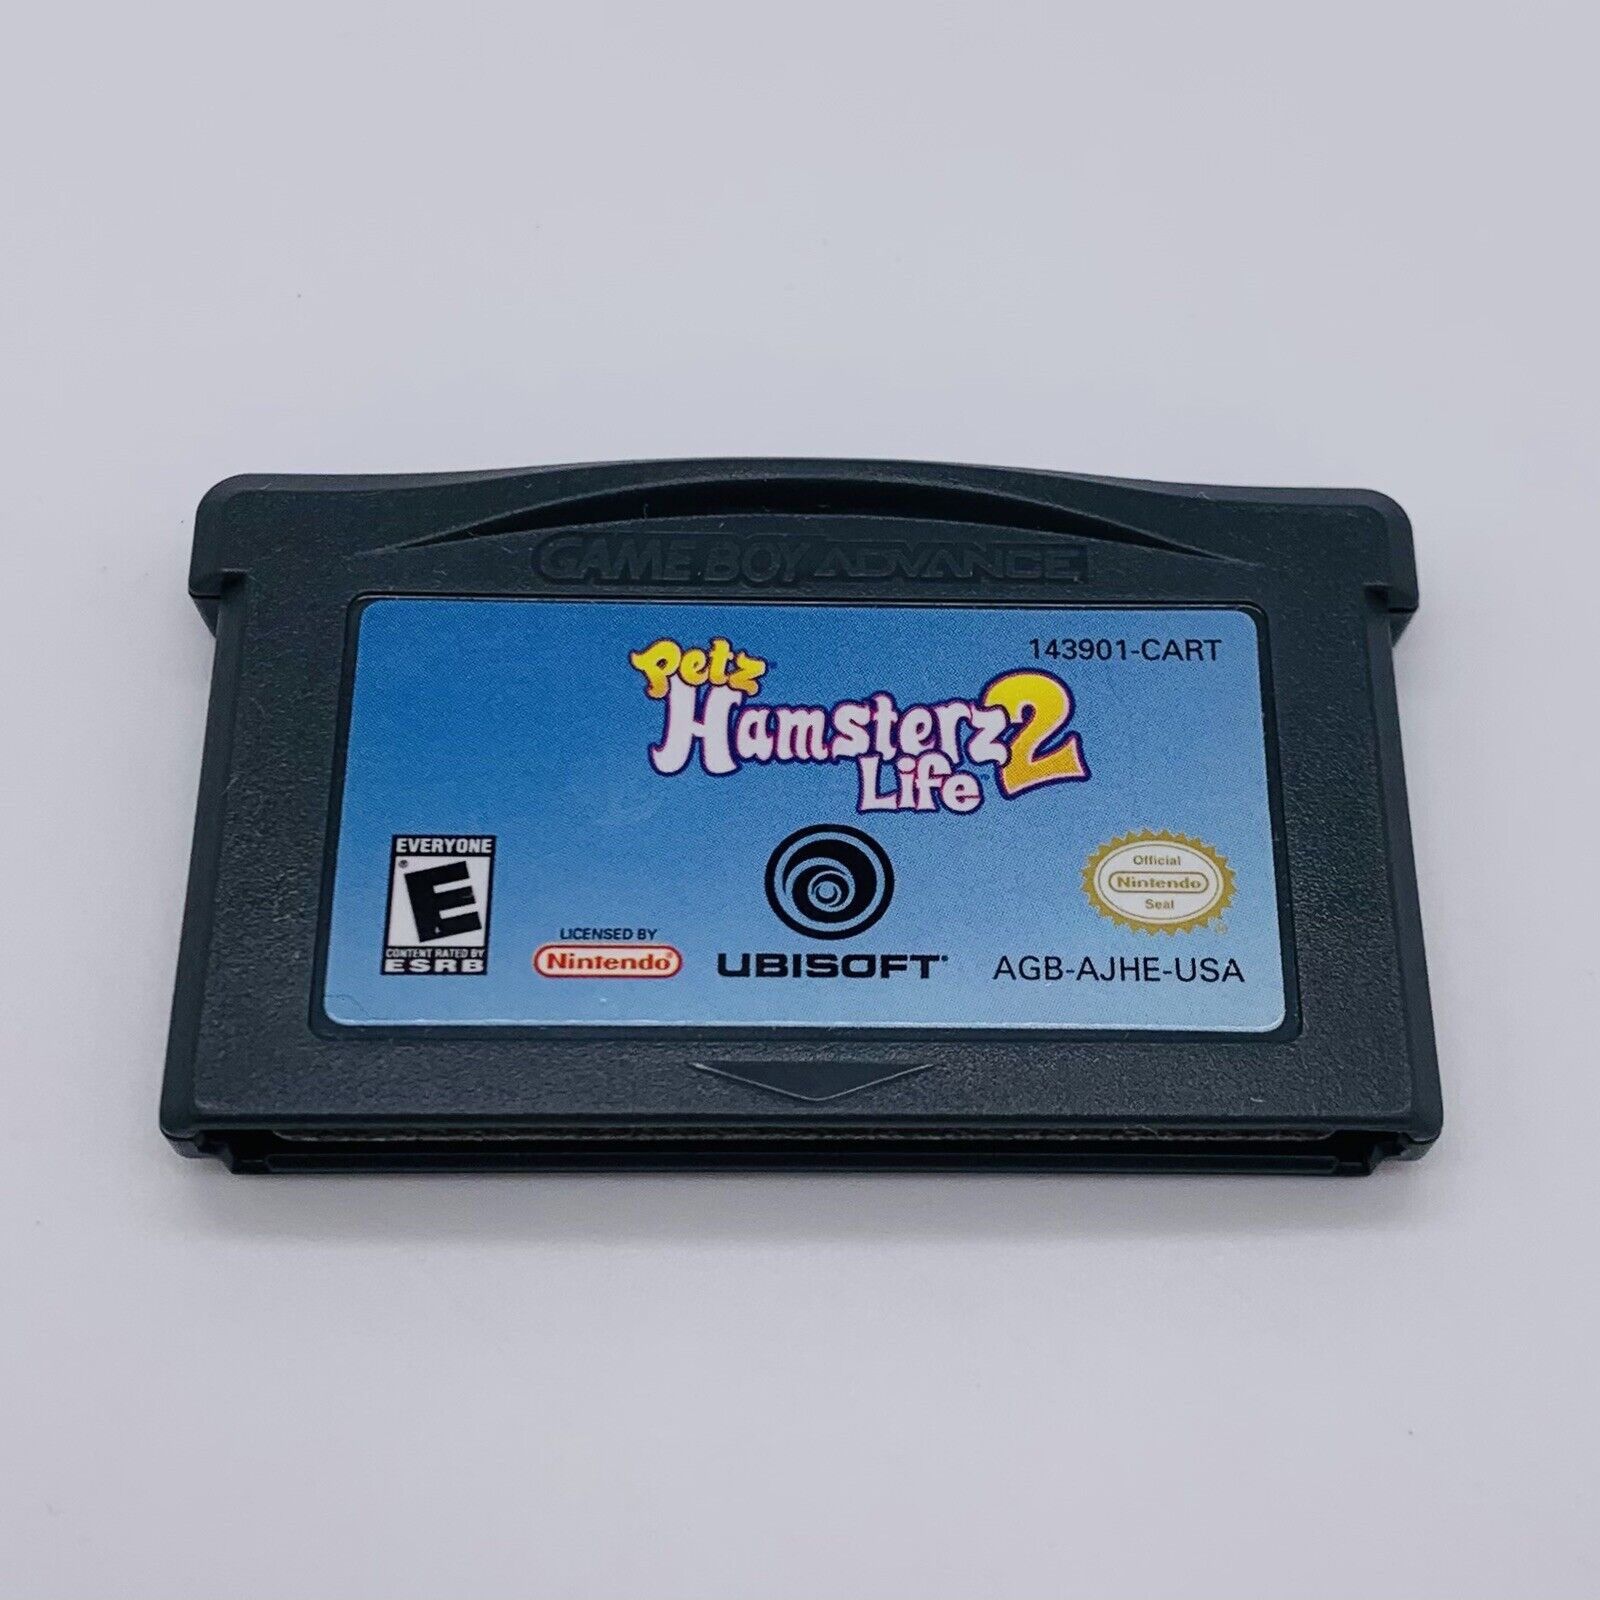 Petz: Hamsterz Life 2 Nintendo Game Boy Advance GBA, 2007 - Authentic Tested